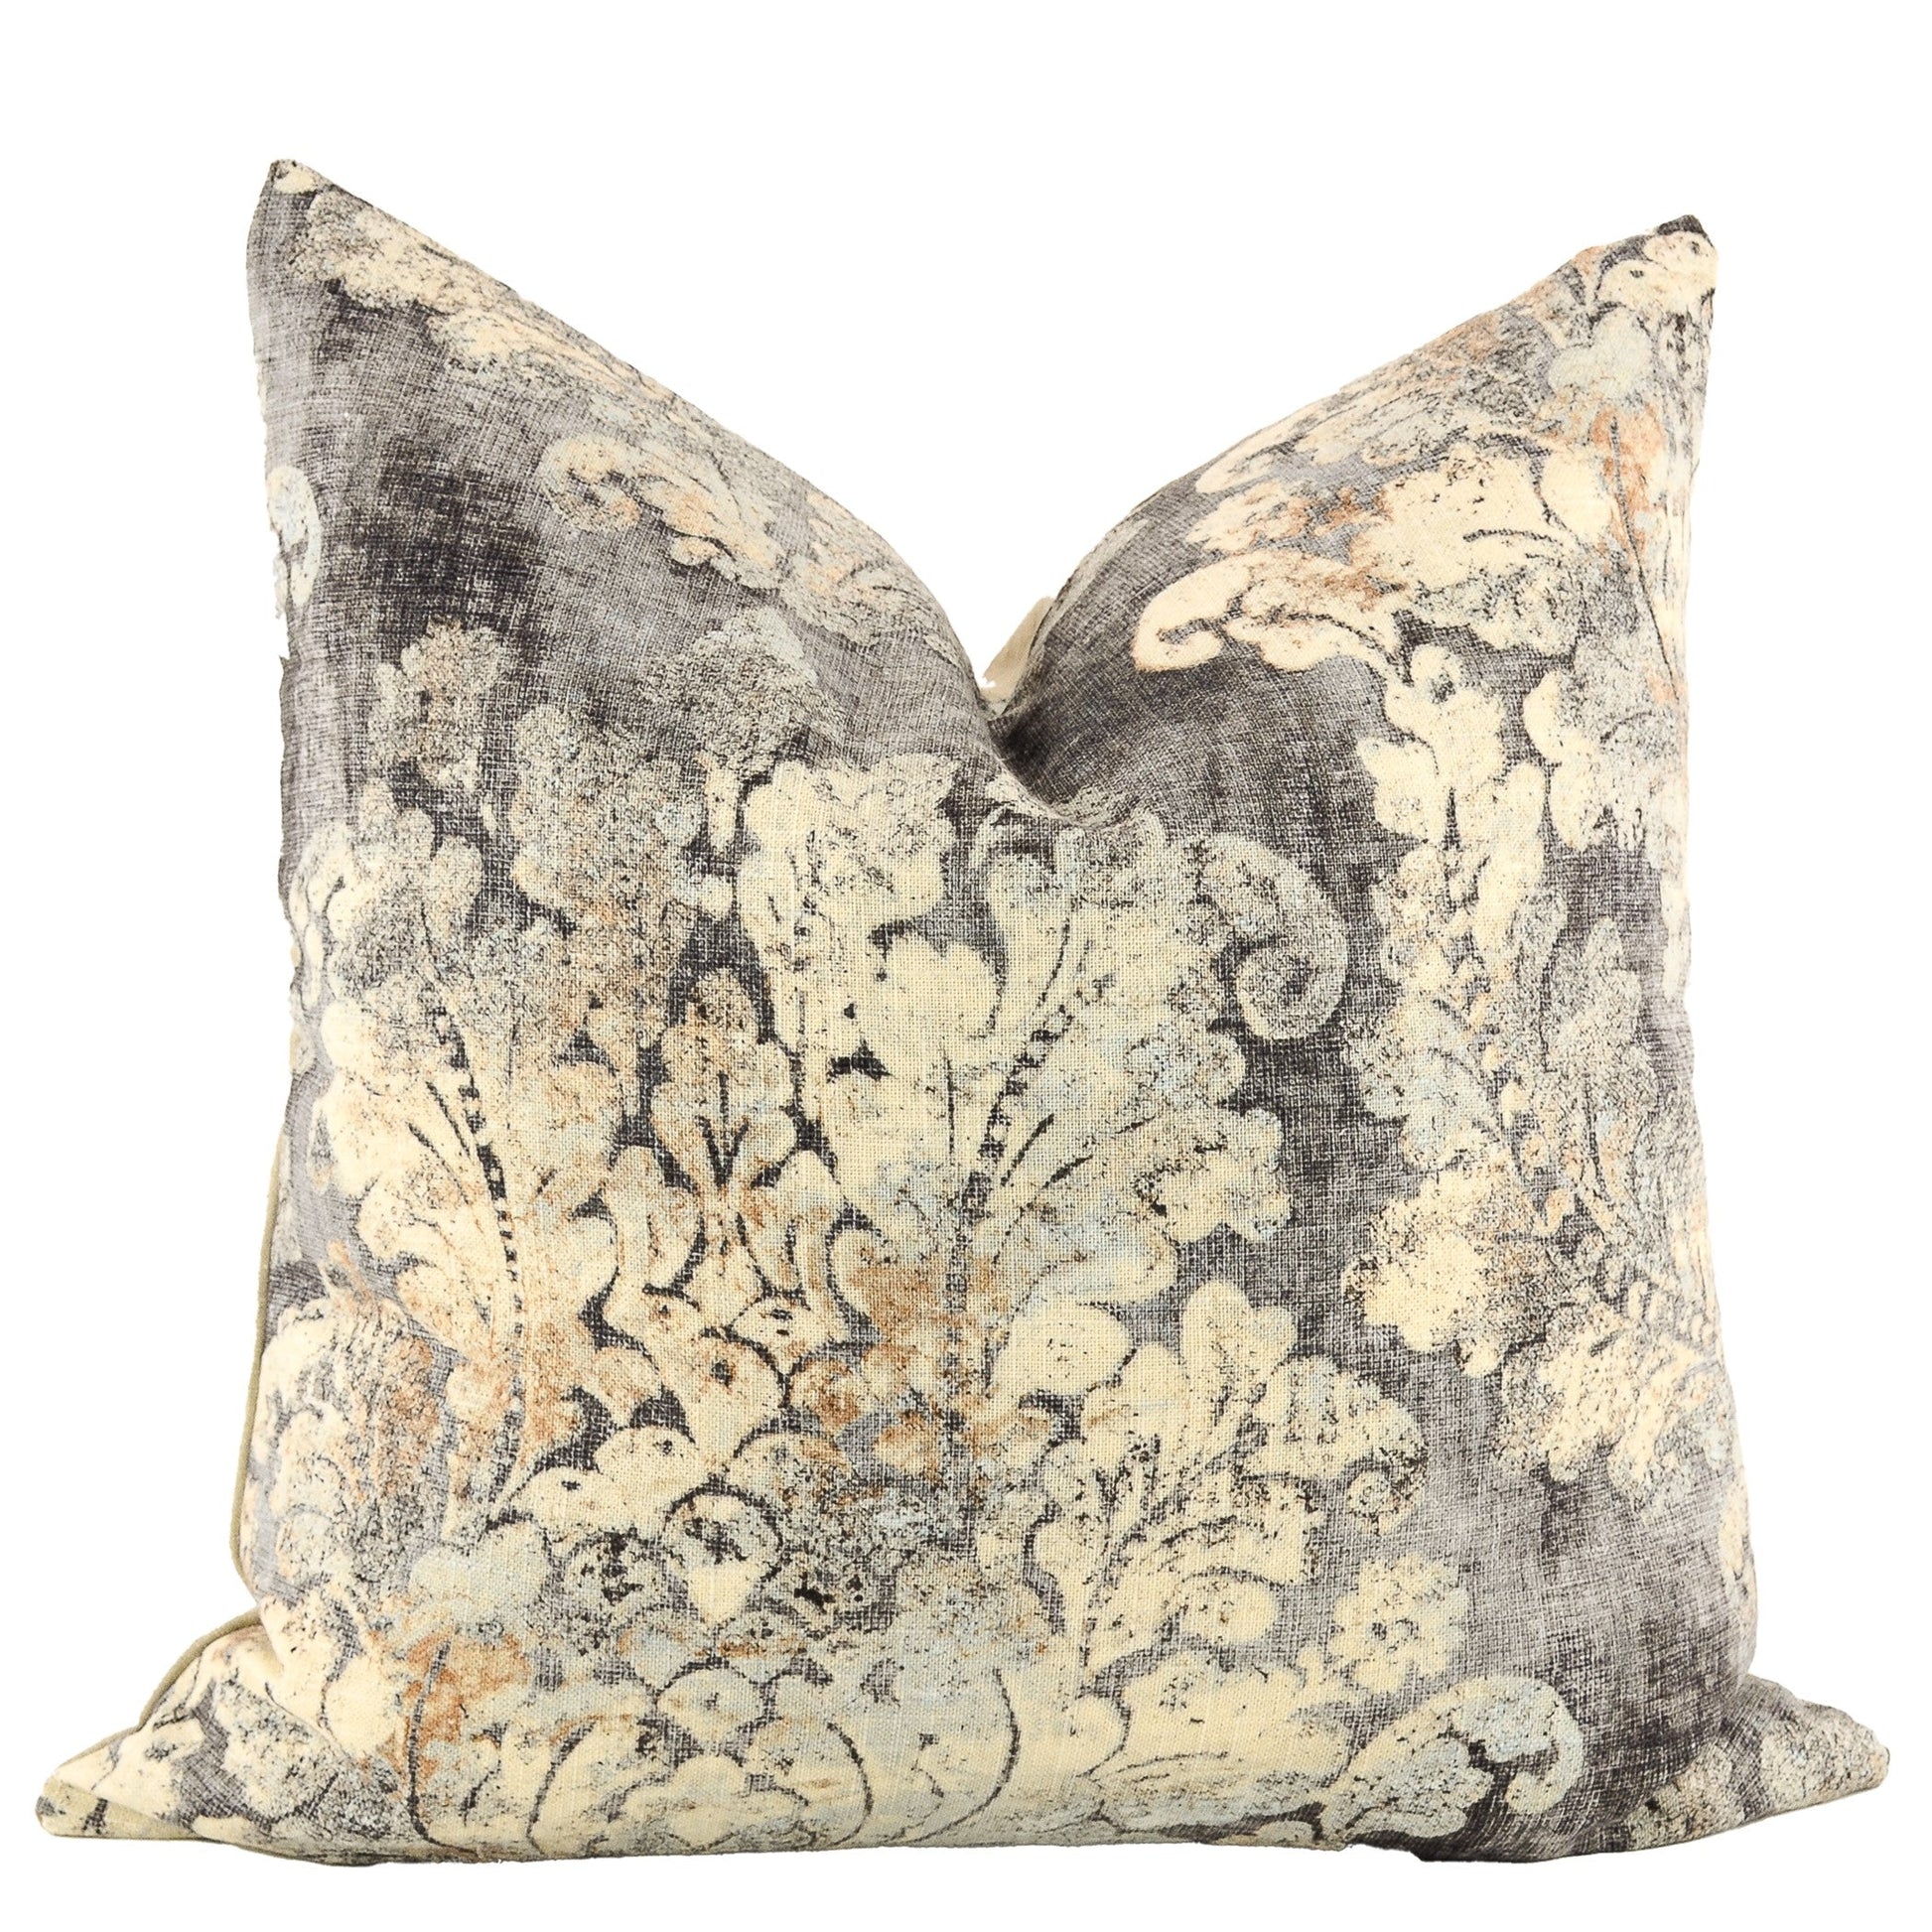 Front of pillow made from a medium-weight, linen-blend designer upholstery fabric with a stunning color combination of soft lemony light yellow flowing into smoky grays 